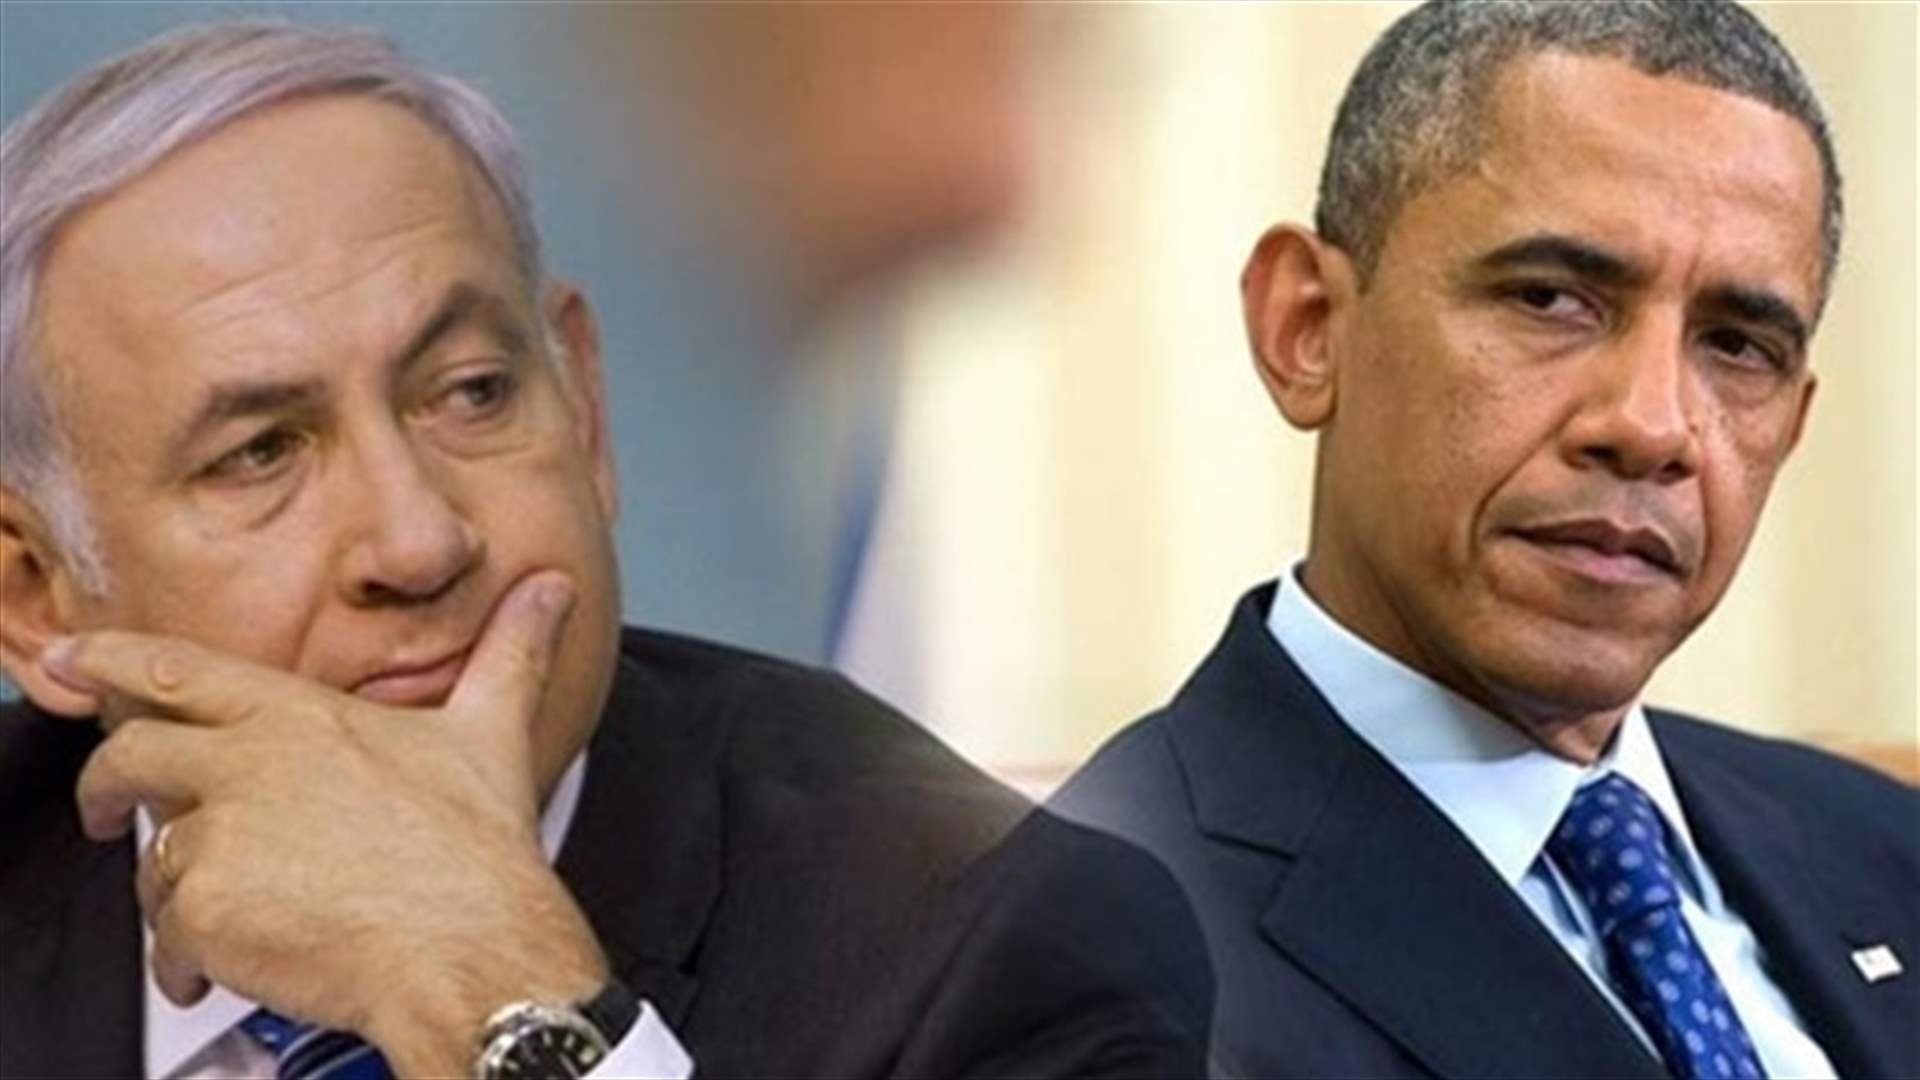 Obama will express his concern to Netanyahu over settlements 